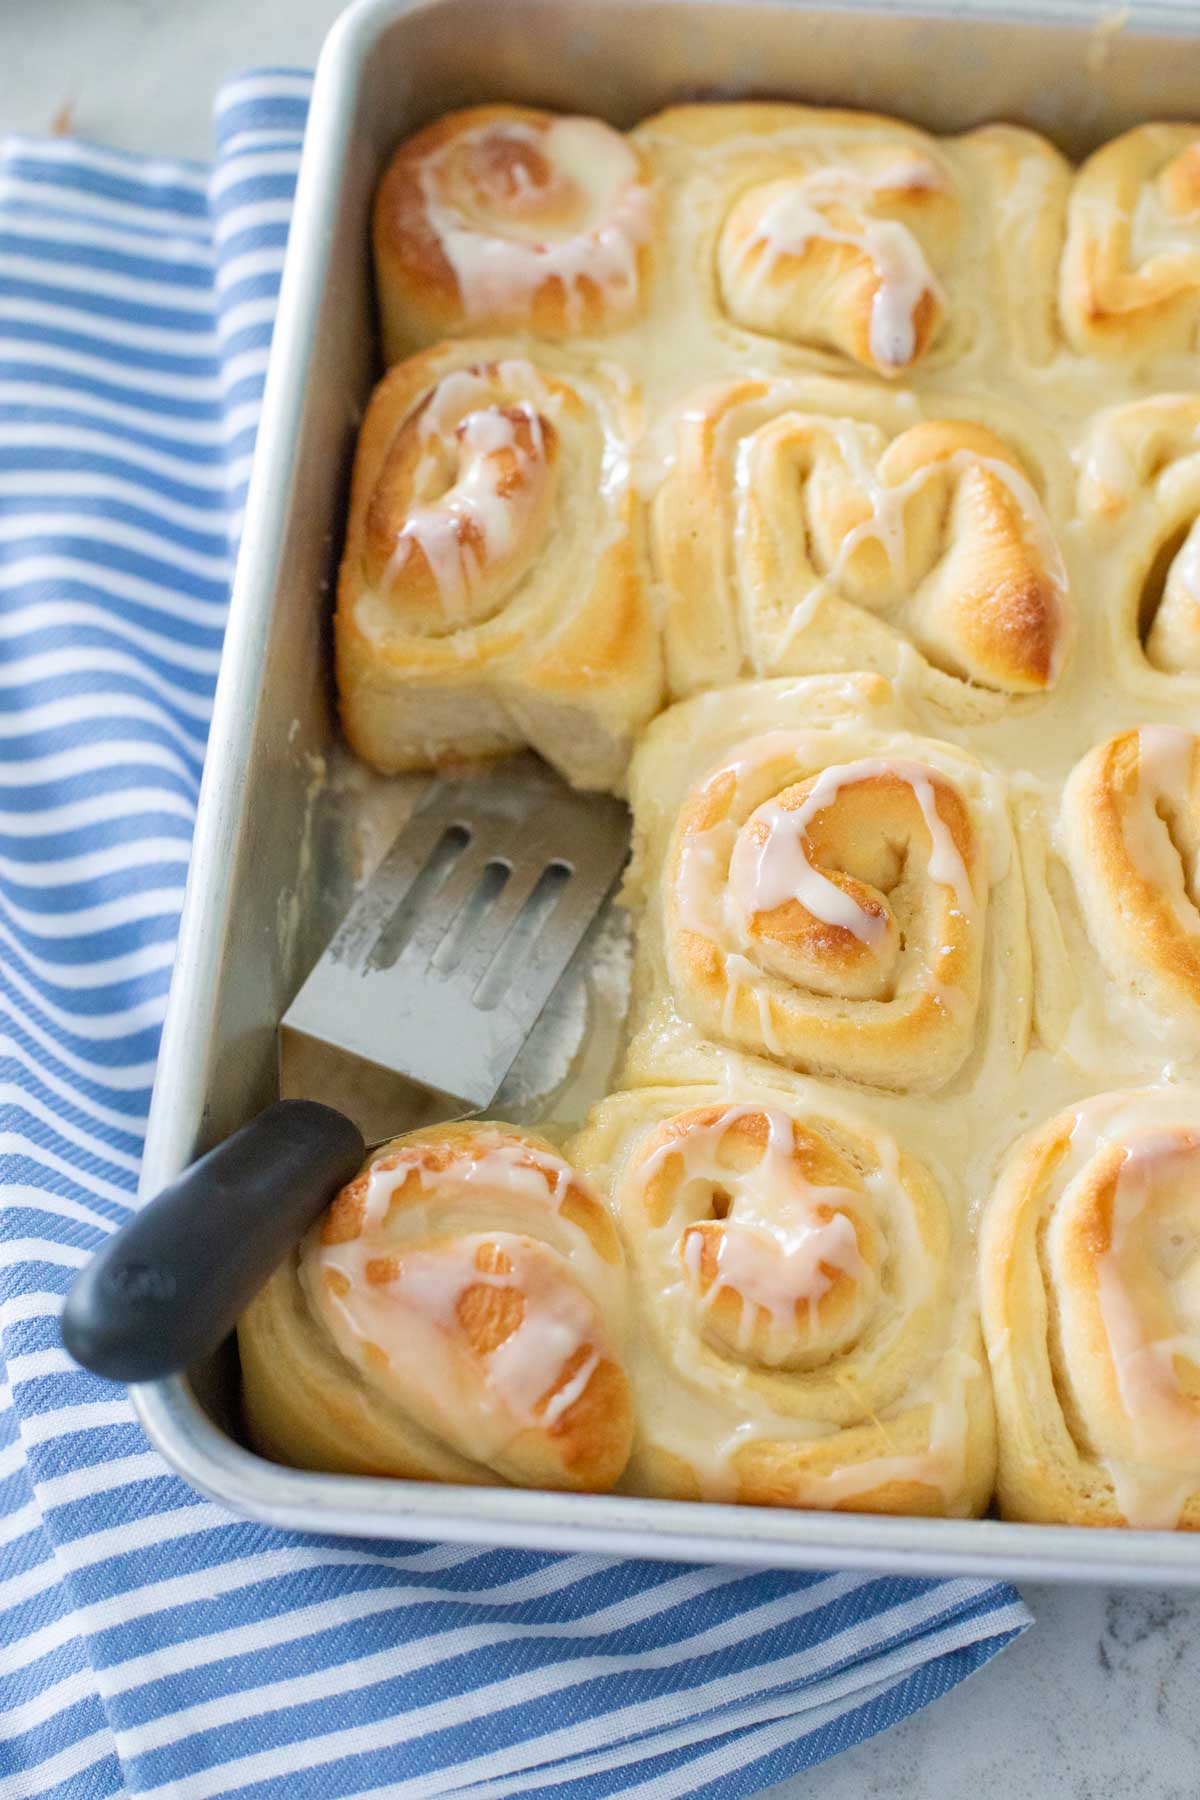 The orange rolls have been iced and a spatula is serving one.